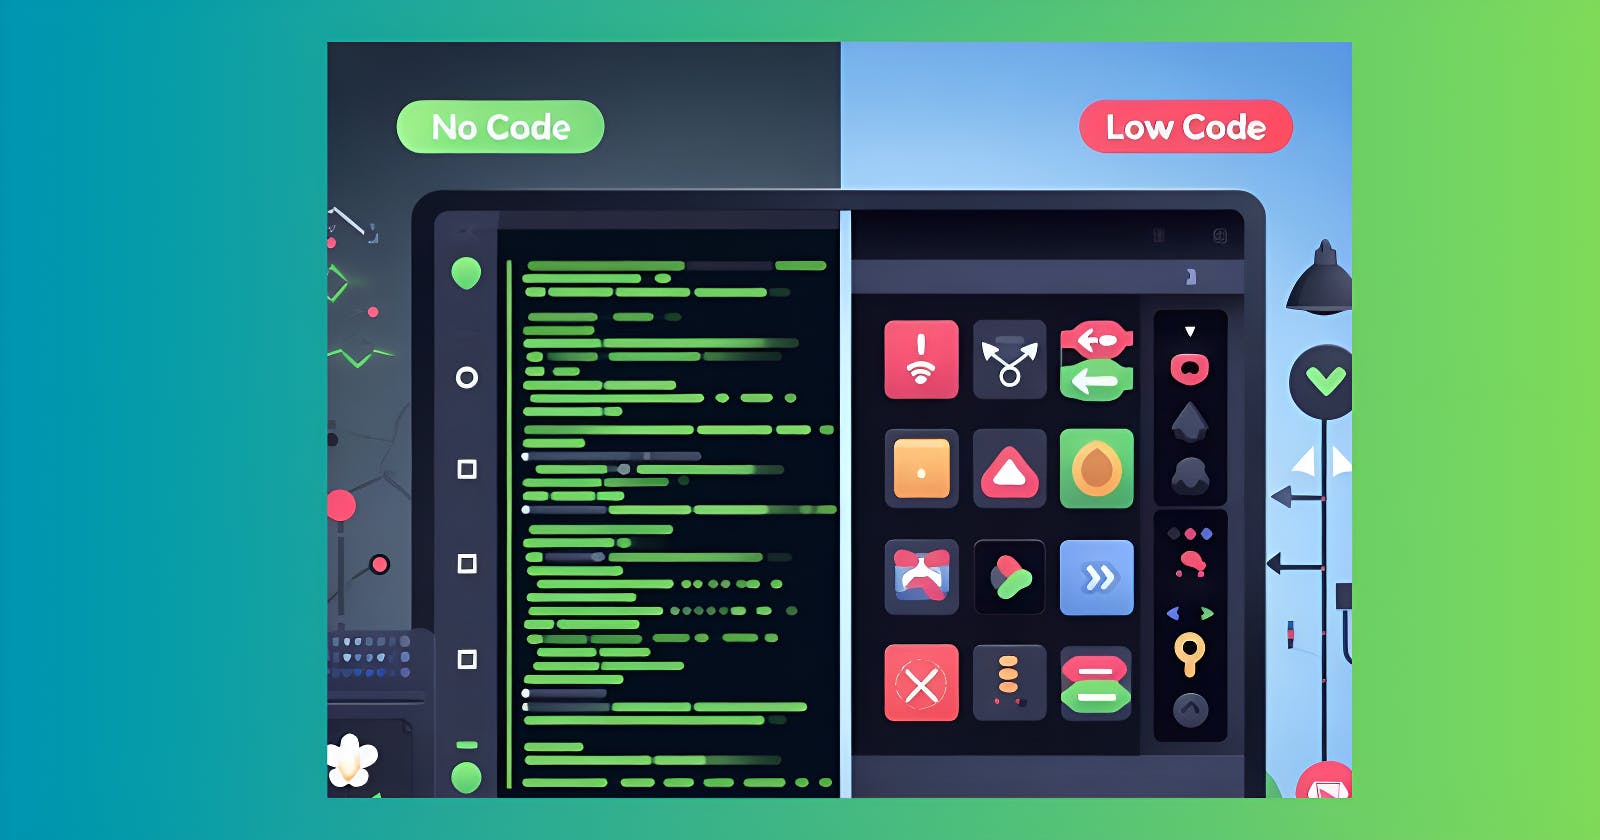 No Code vs. Low Code: What's the Difference?